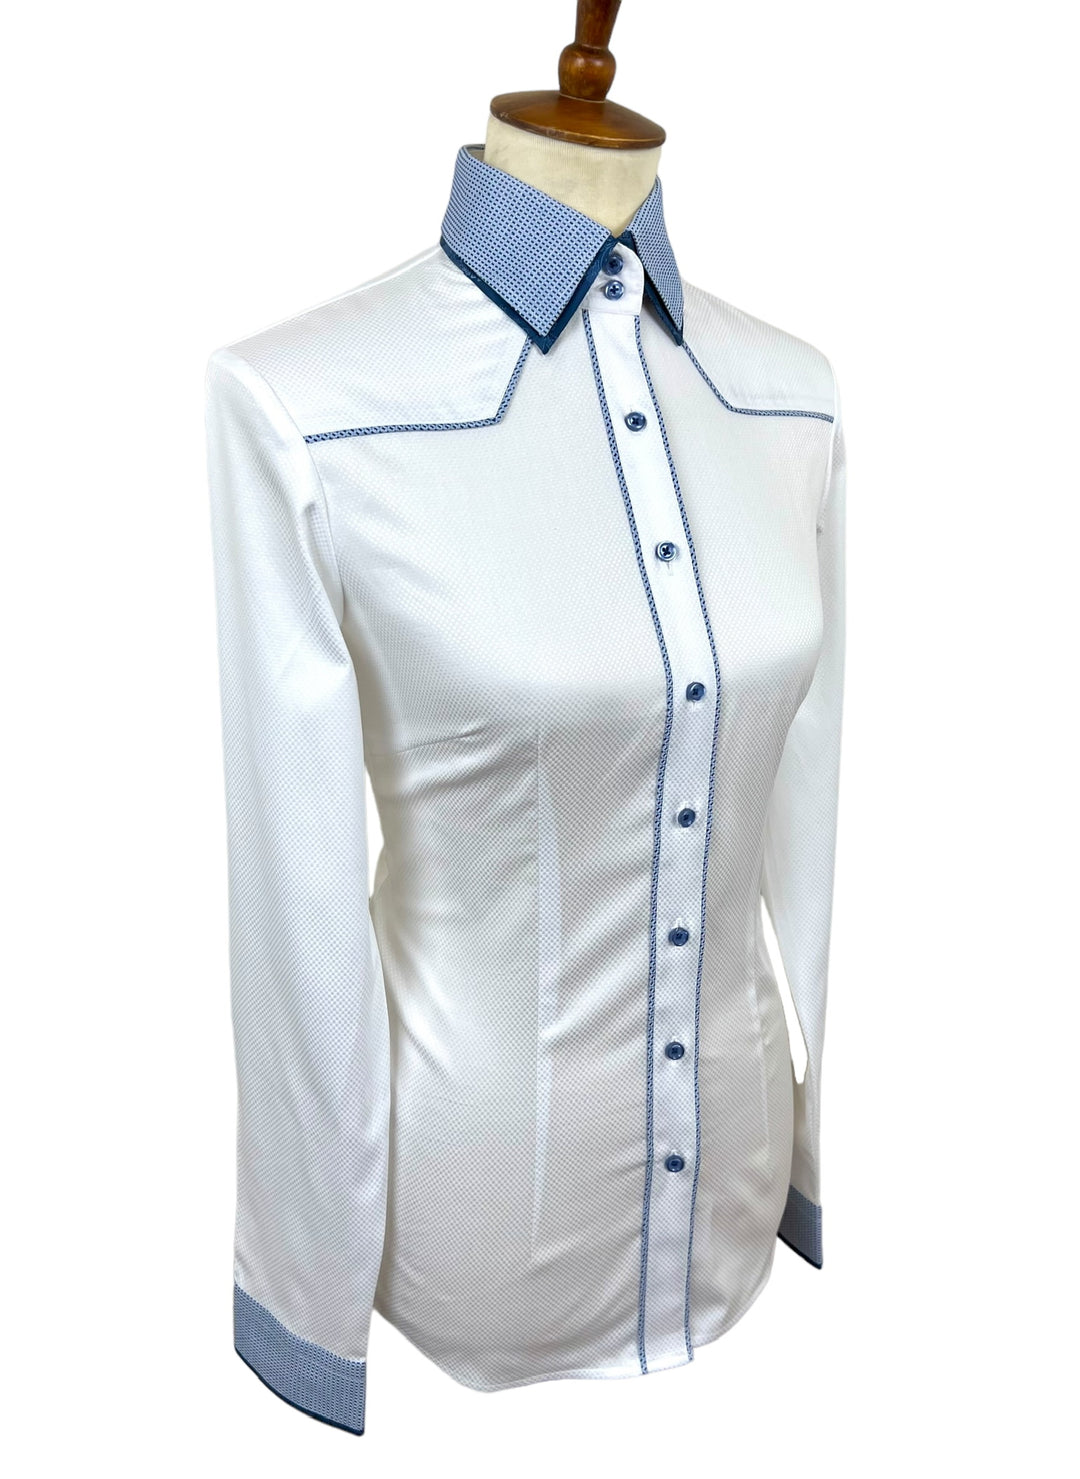 The Trudy Western Shirt